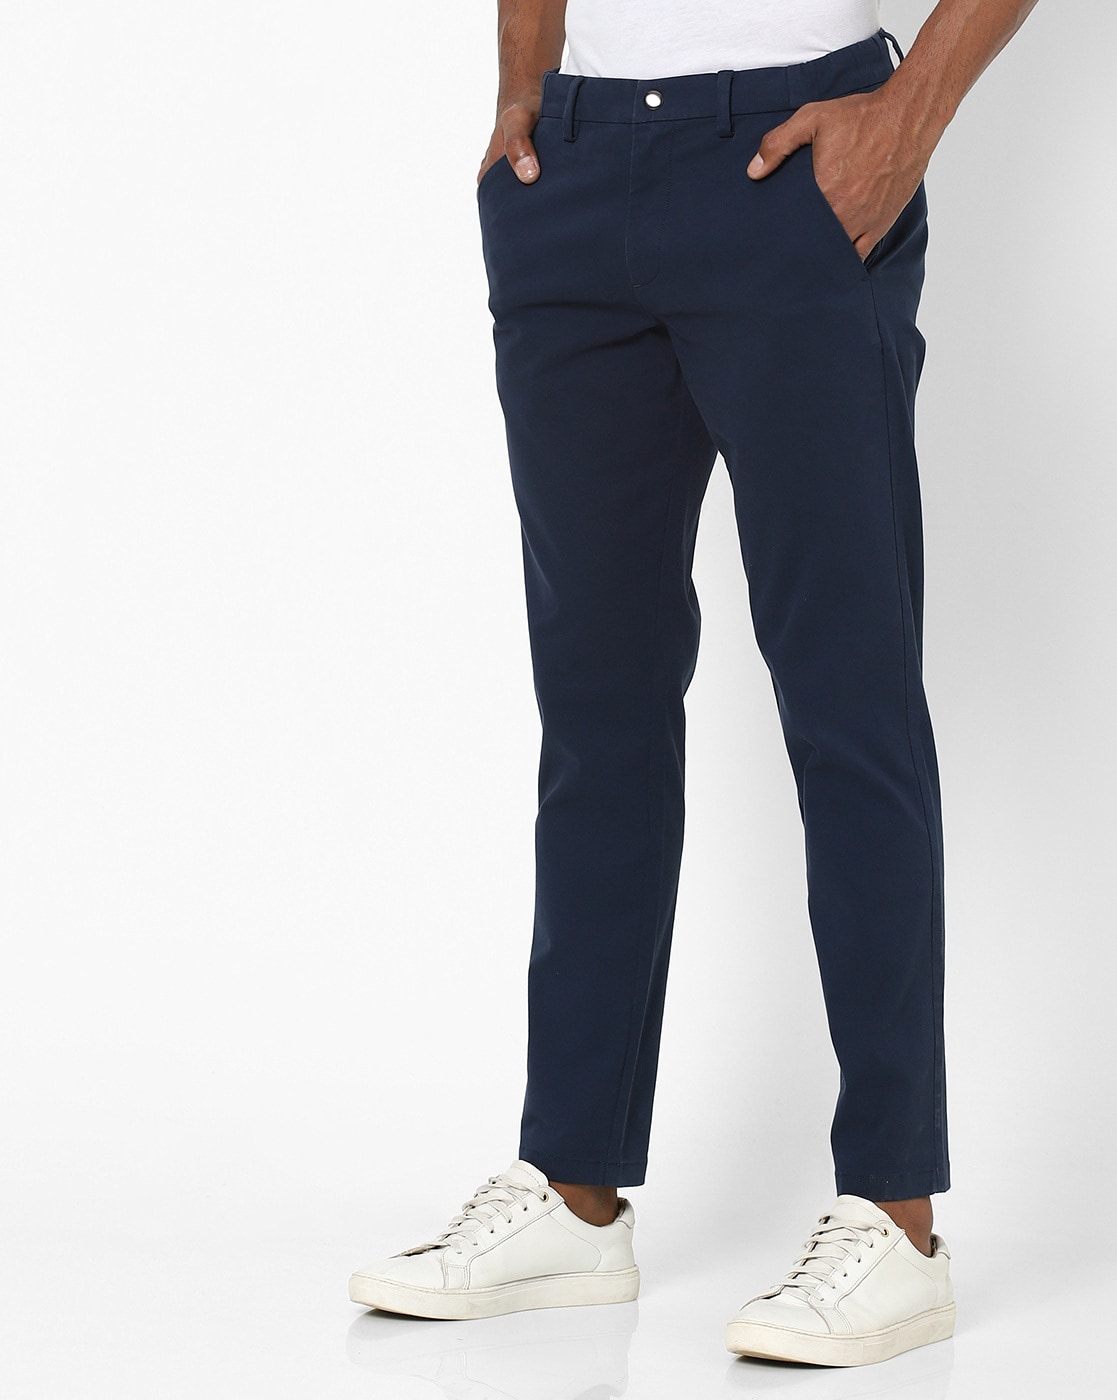 NETPLAY Tapered Fit Cotton Trouser With Insert Pockets|BDF Shopping